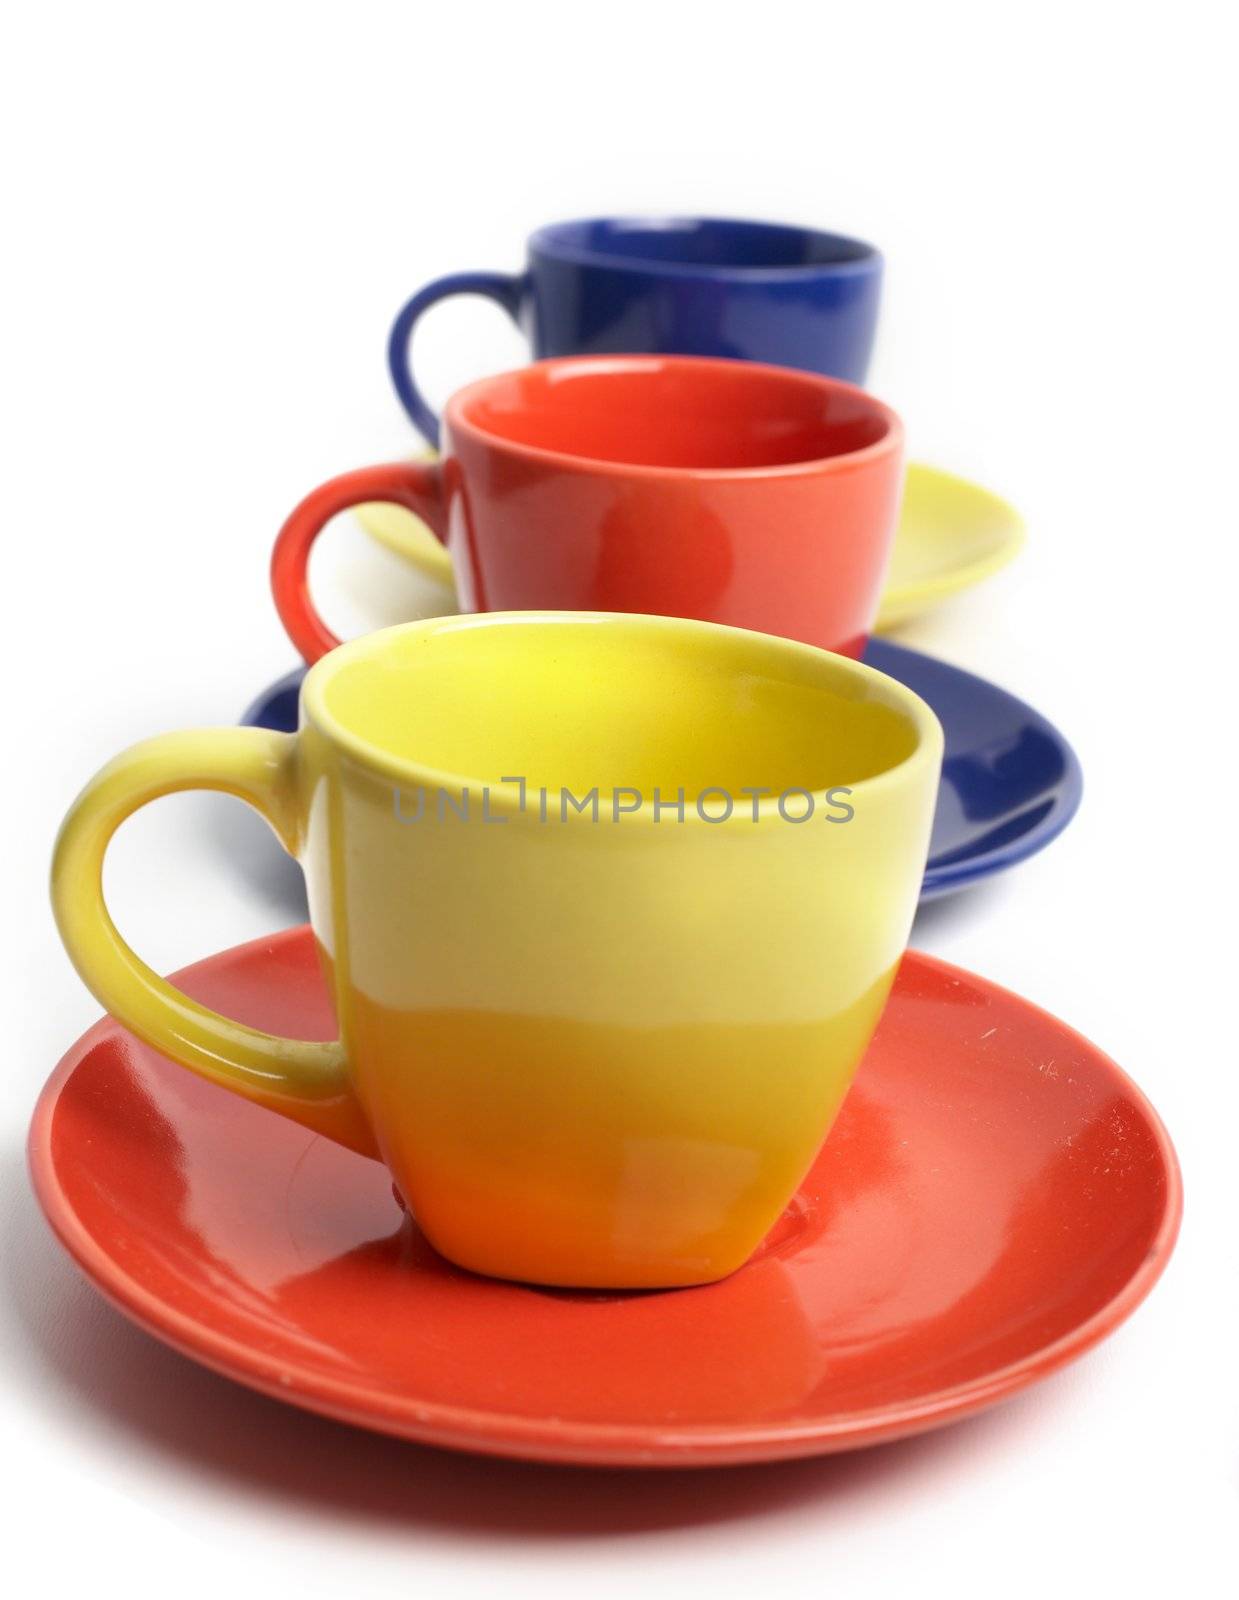 Cups and saucers by velkol